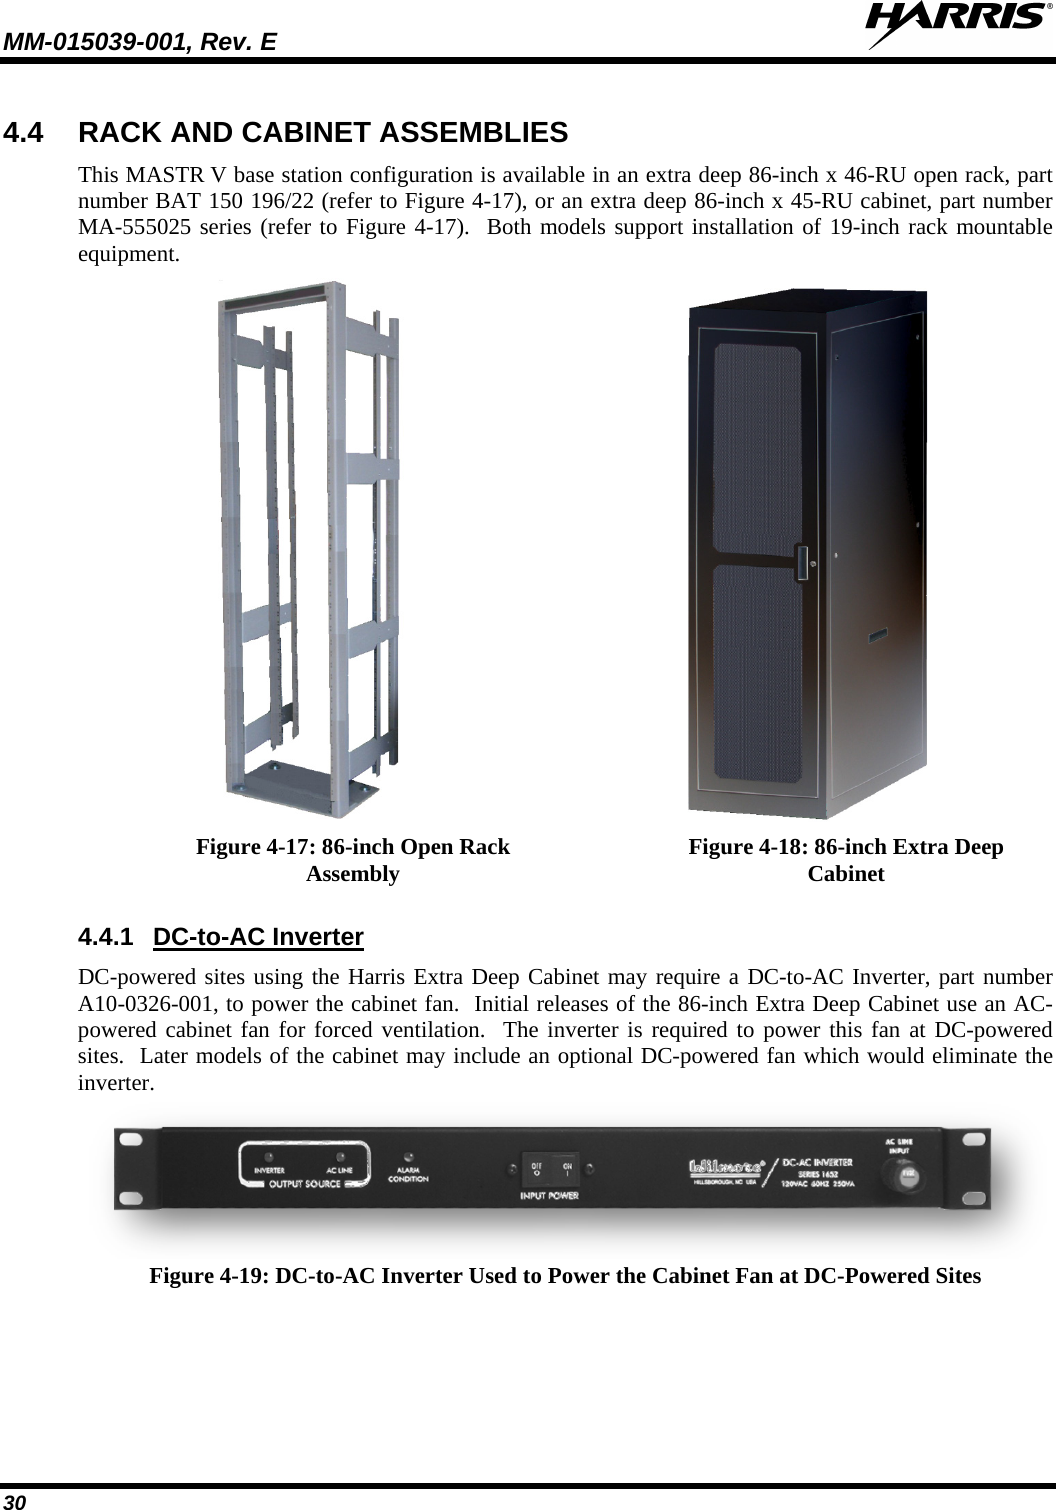 MM-015039-001, Rev. E     30 4.4 RACK AND CABINET ASSEMBLIES This MASTR V base station configuration is available in an extra deep 86-inch x 46-RU open rack, part number BAT 150 196/22 (refer to Figure 4-17), or an extra deep 86-inch x 45-RU cabinet, part number MA-555025 series (refer to Figure 4-17).  Both models support installation of 19-inch rack mountable equipment.   Figure 4-17: 86-inch Open Rack Assembly Figure 4-18: 86-inch Extra Deep Cabinet  4.4.1 DC-to-AC Inverter DC-powered sites using the Harris Extra Deep Cabinet may require a DC-to-AC Inverter, part number A10-0326-001, to power the cabinet fan.  Initial releases of the 86-inch Extra Deep Cabinet use an AC-powered cabinet fan for forced ventilation.  The inverter is required to power this fan at DC-powered sites.  Later models of the cabinet may include an optional DC-powered fan which would eliminate the inverter.  Figure 4-19: DC-to-AC Inverter Used to Power the Cabinet Fan at DC-Powered Sites 